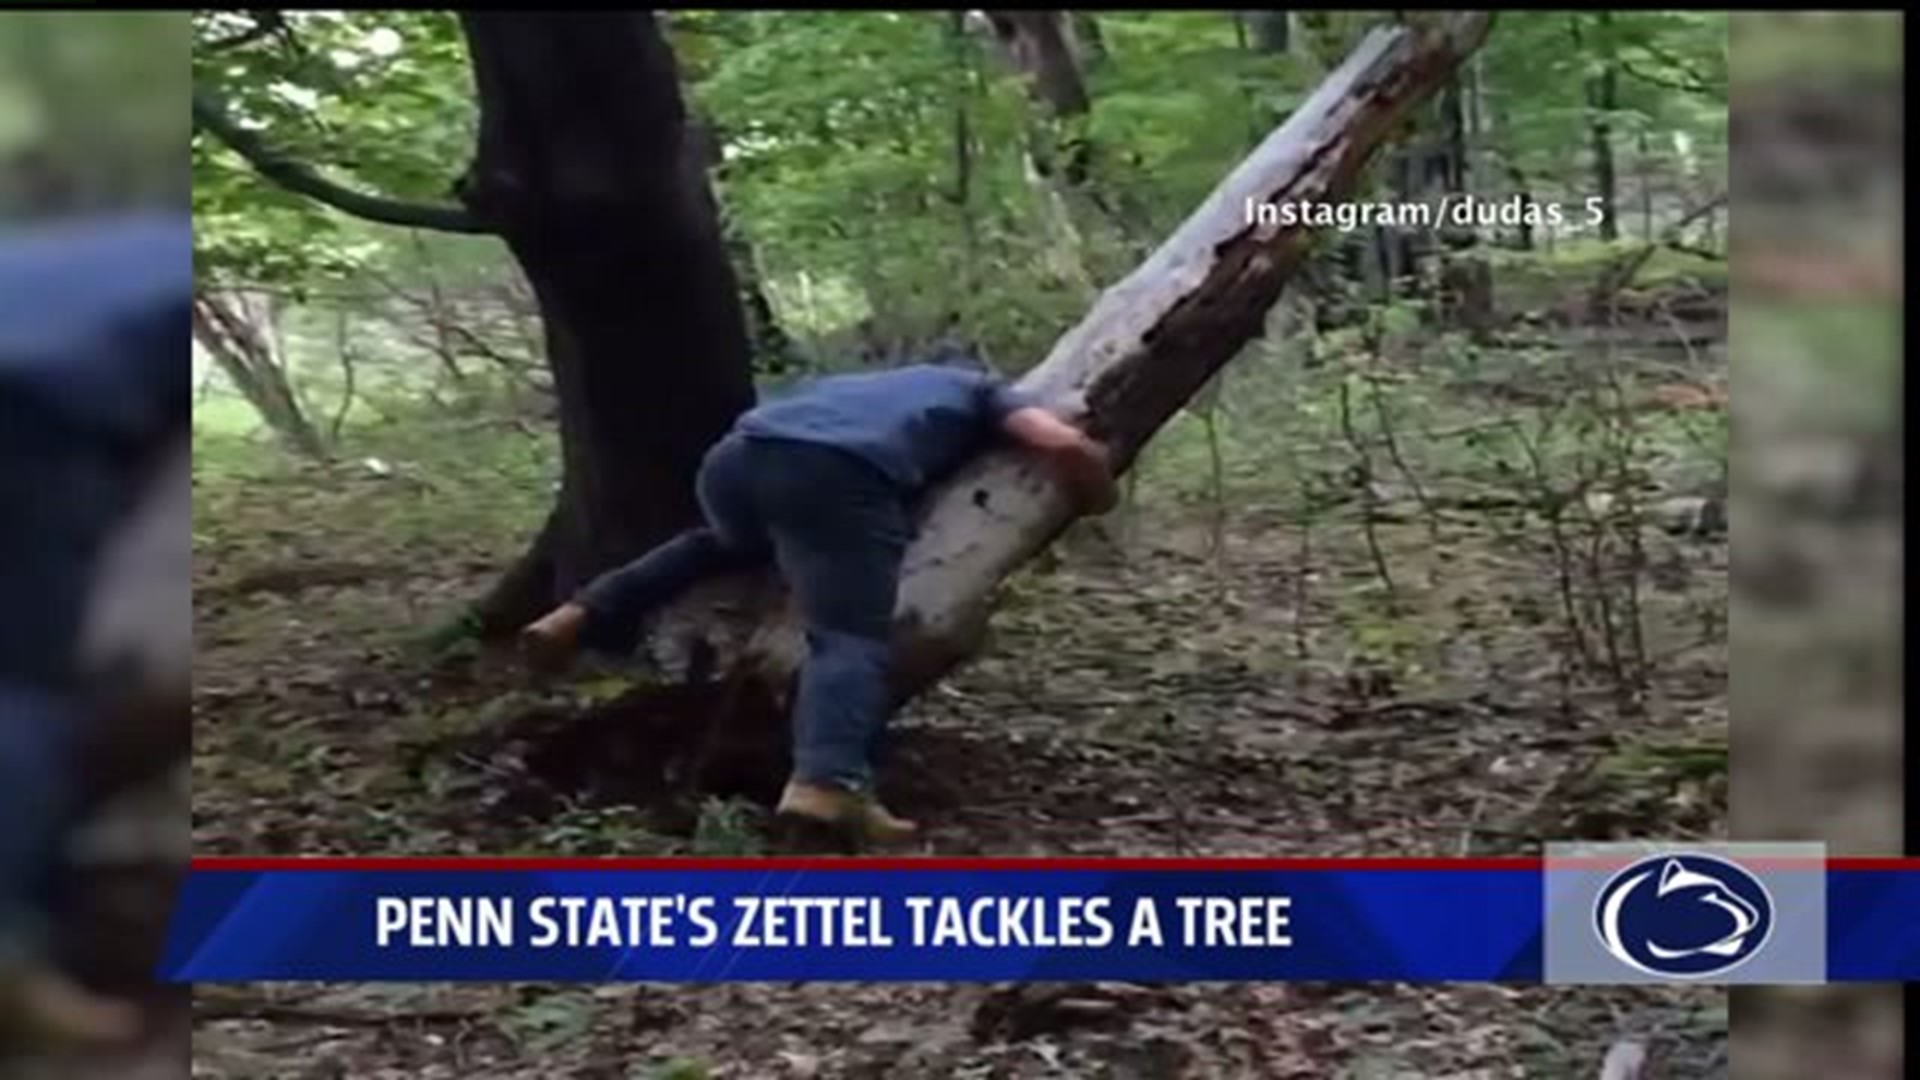 PSU Defensive Tackle Anthony Zettel trains by tackling a tree